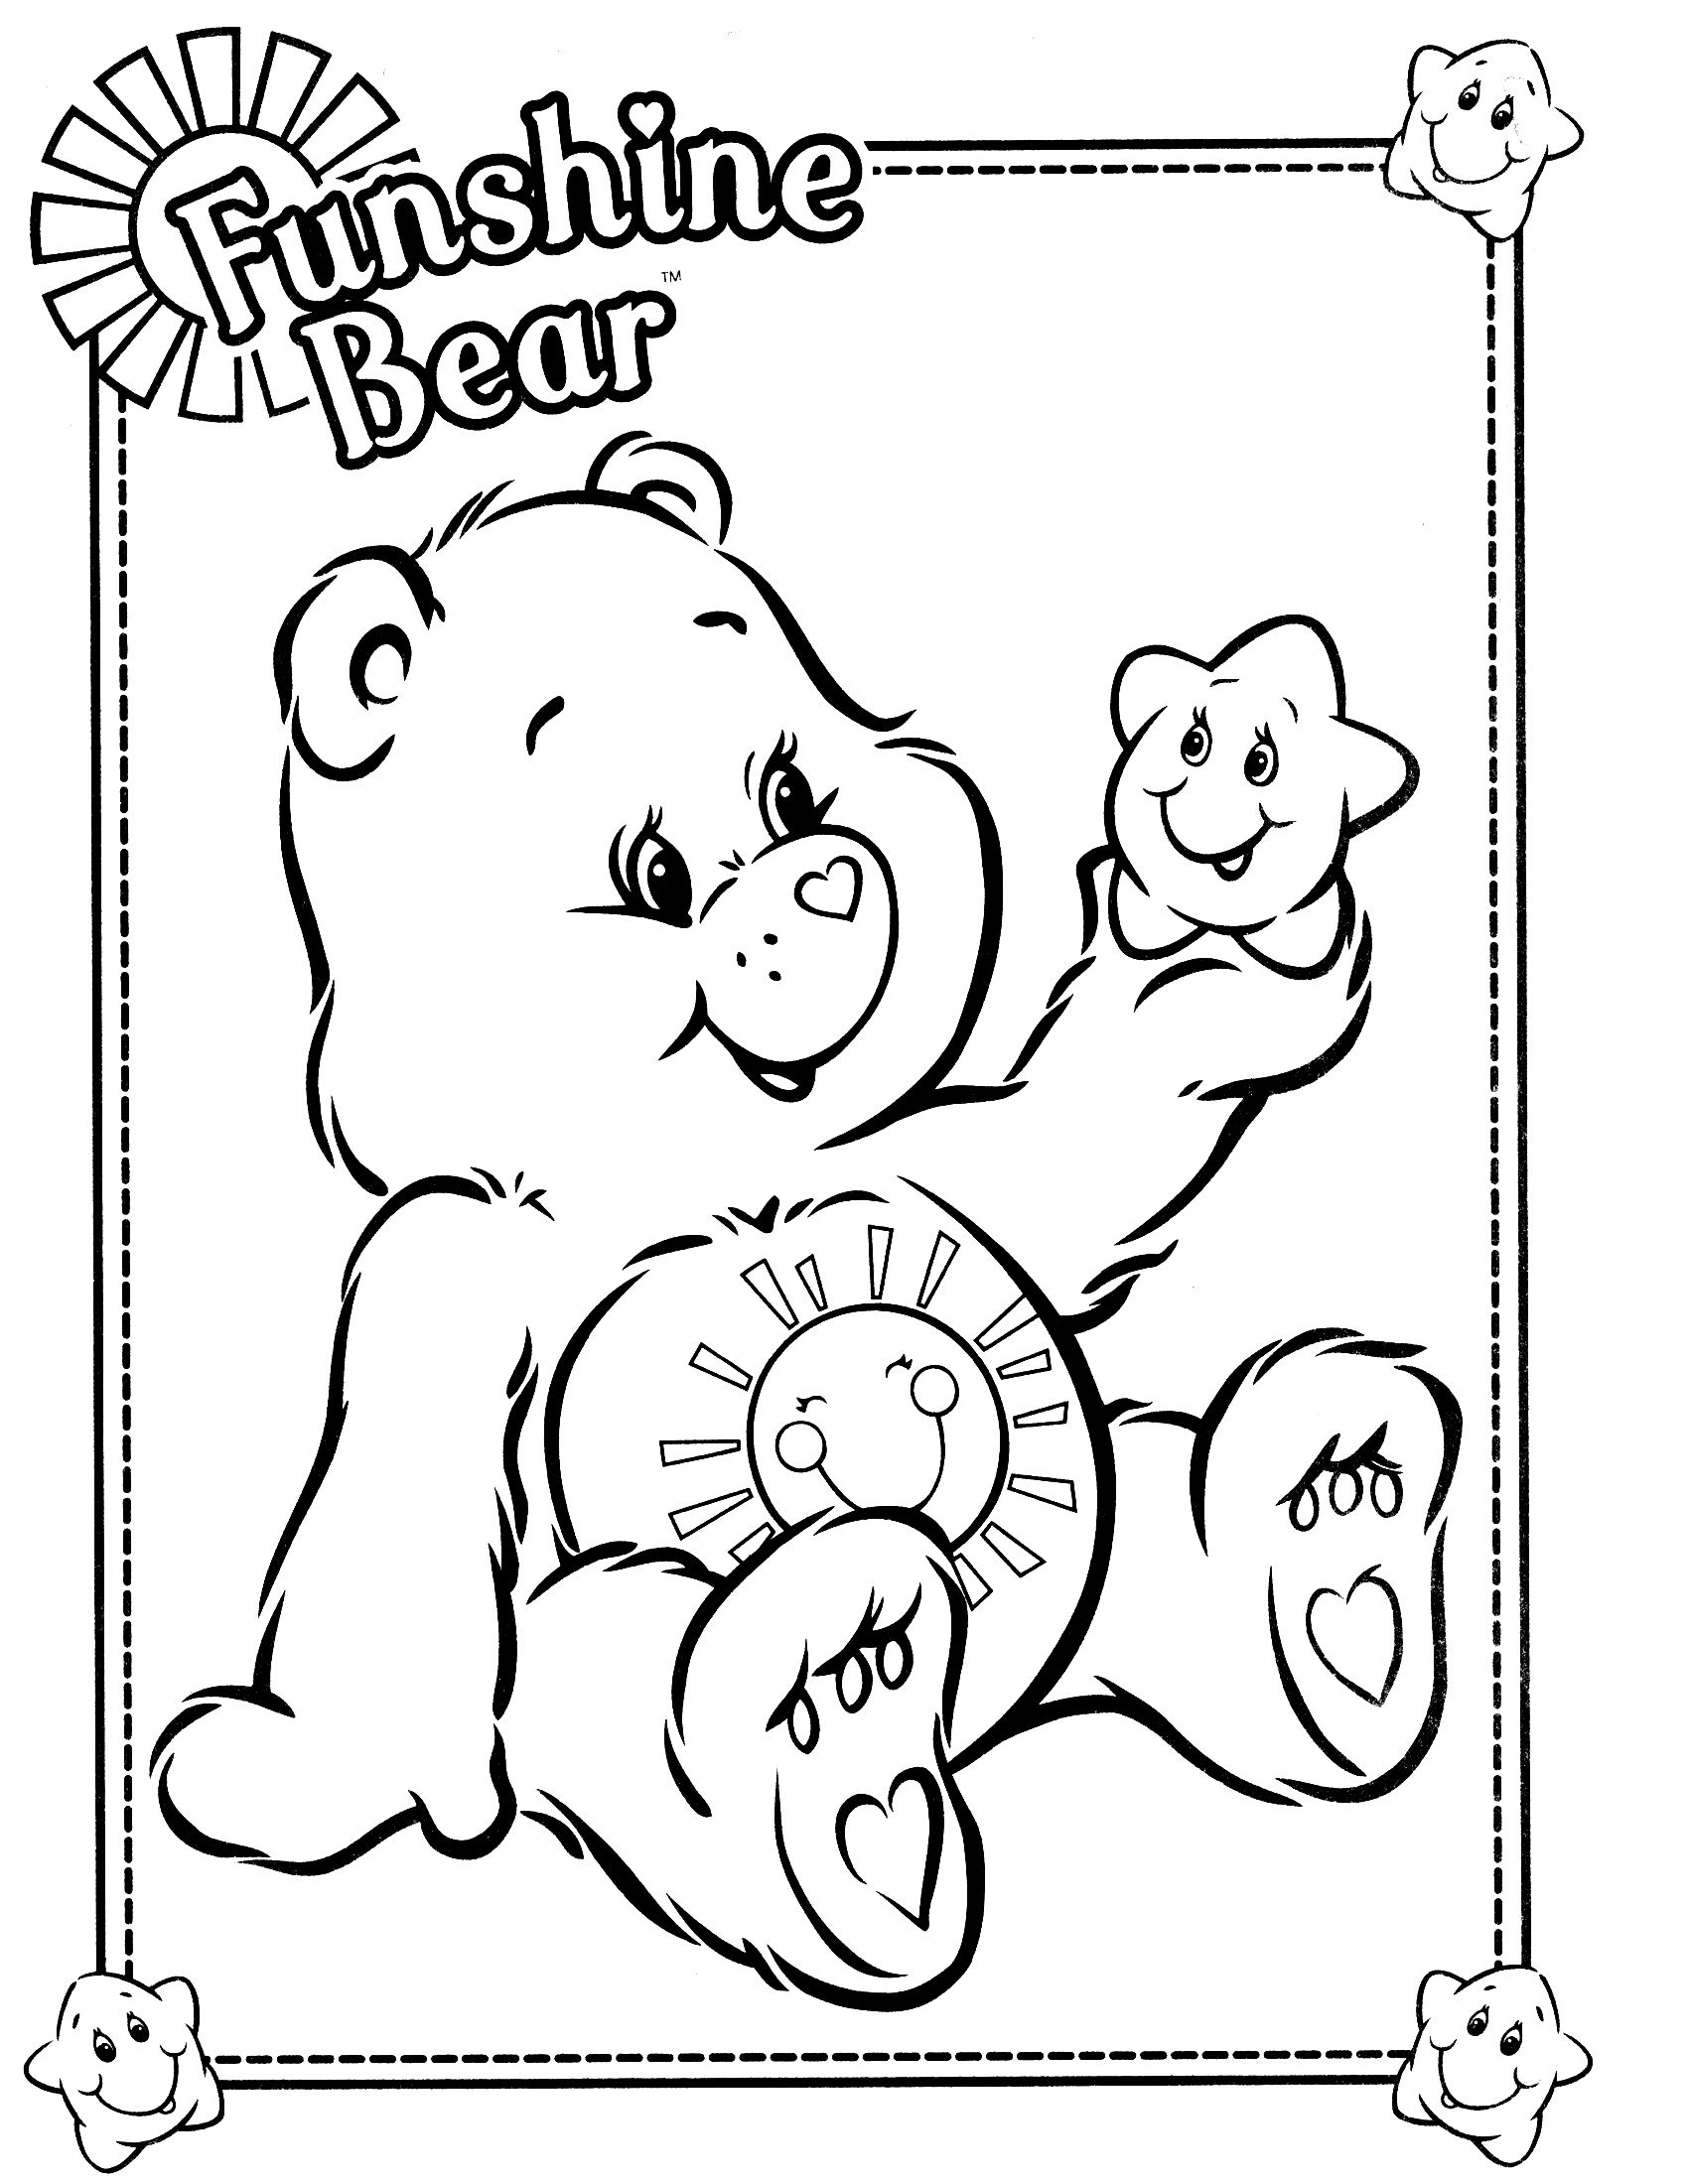 Free Care Bear Coloring Pages Free Care Bear Coloring Pages At Getdrawings Free For Personal